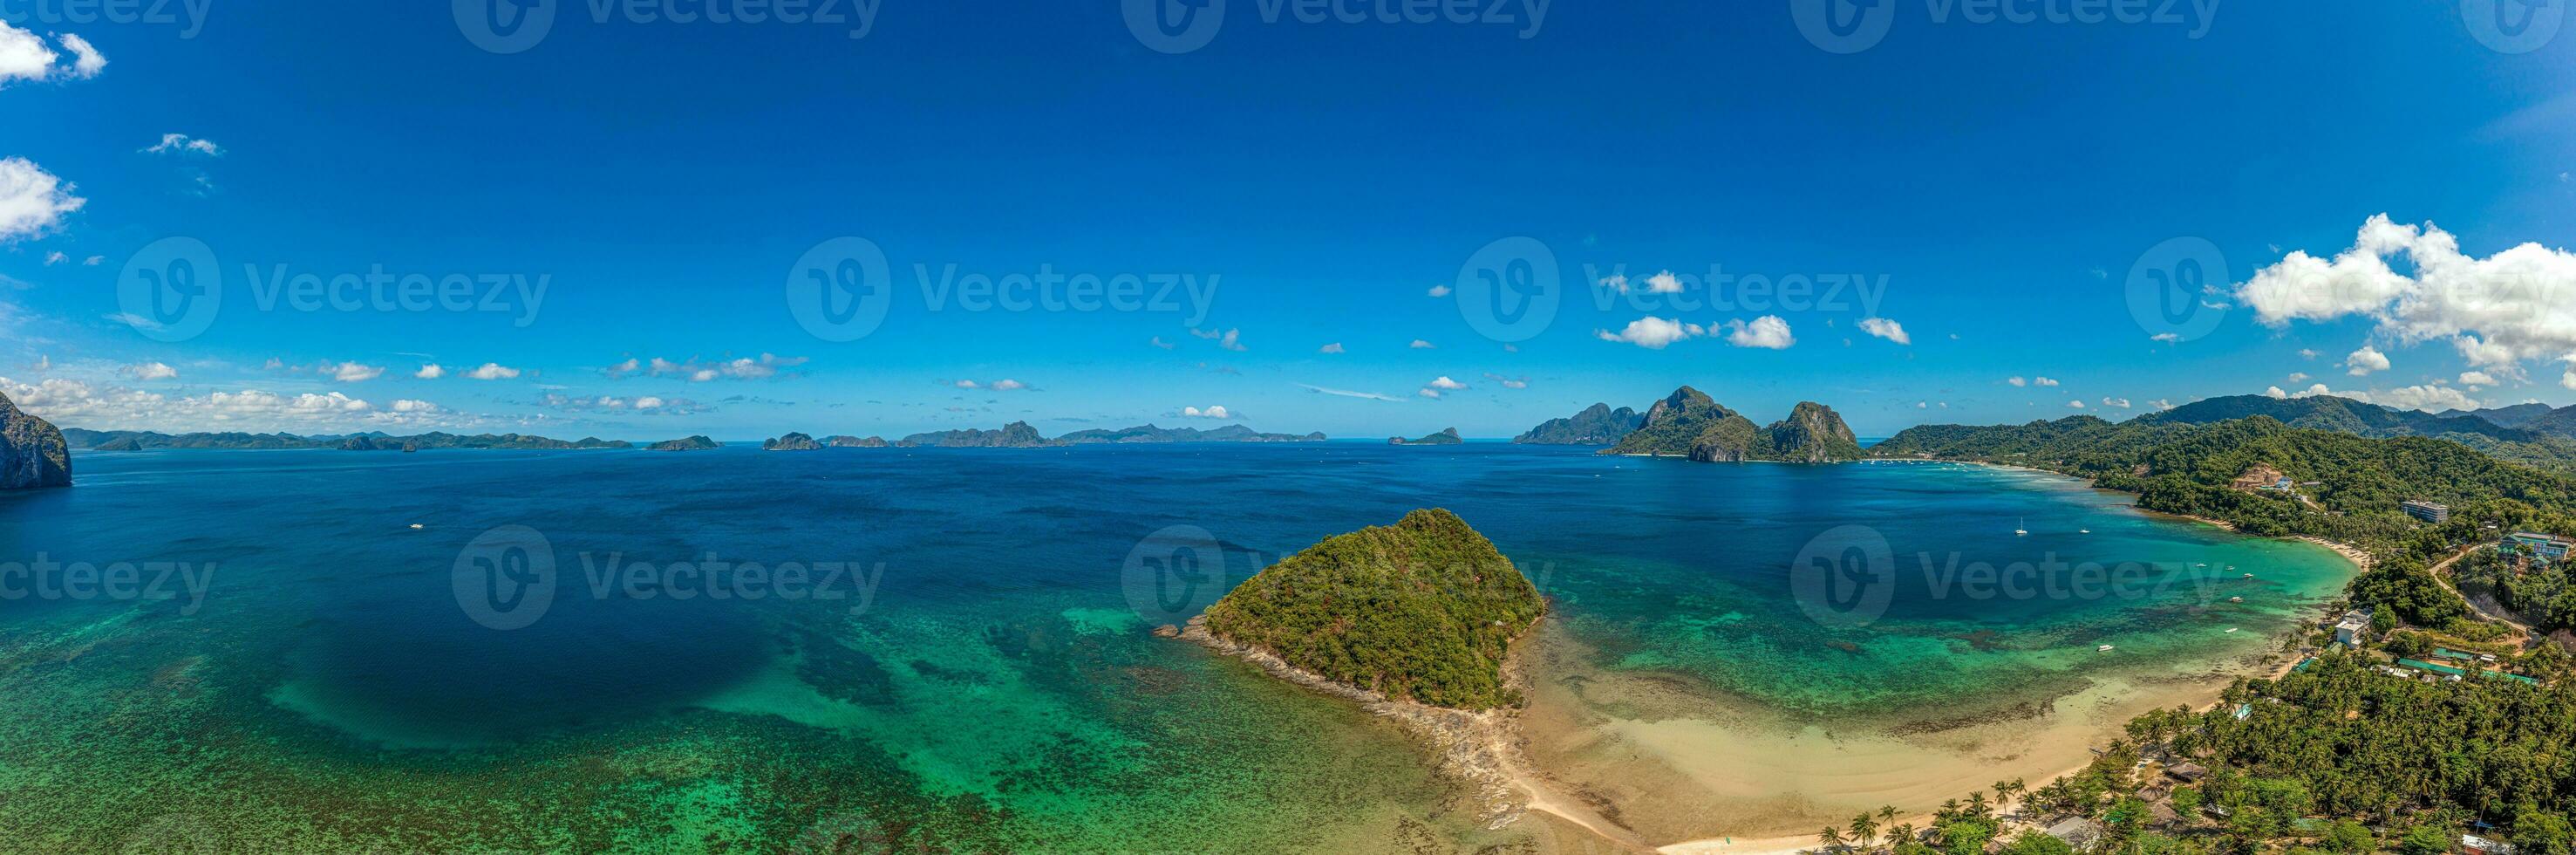 Drone panorama of the paradisiacal Maremegmeg beach near El Nido on the Philippine island of Palawan during the day photo